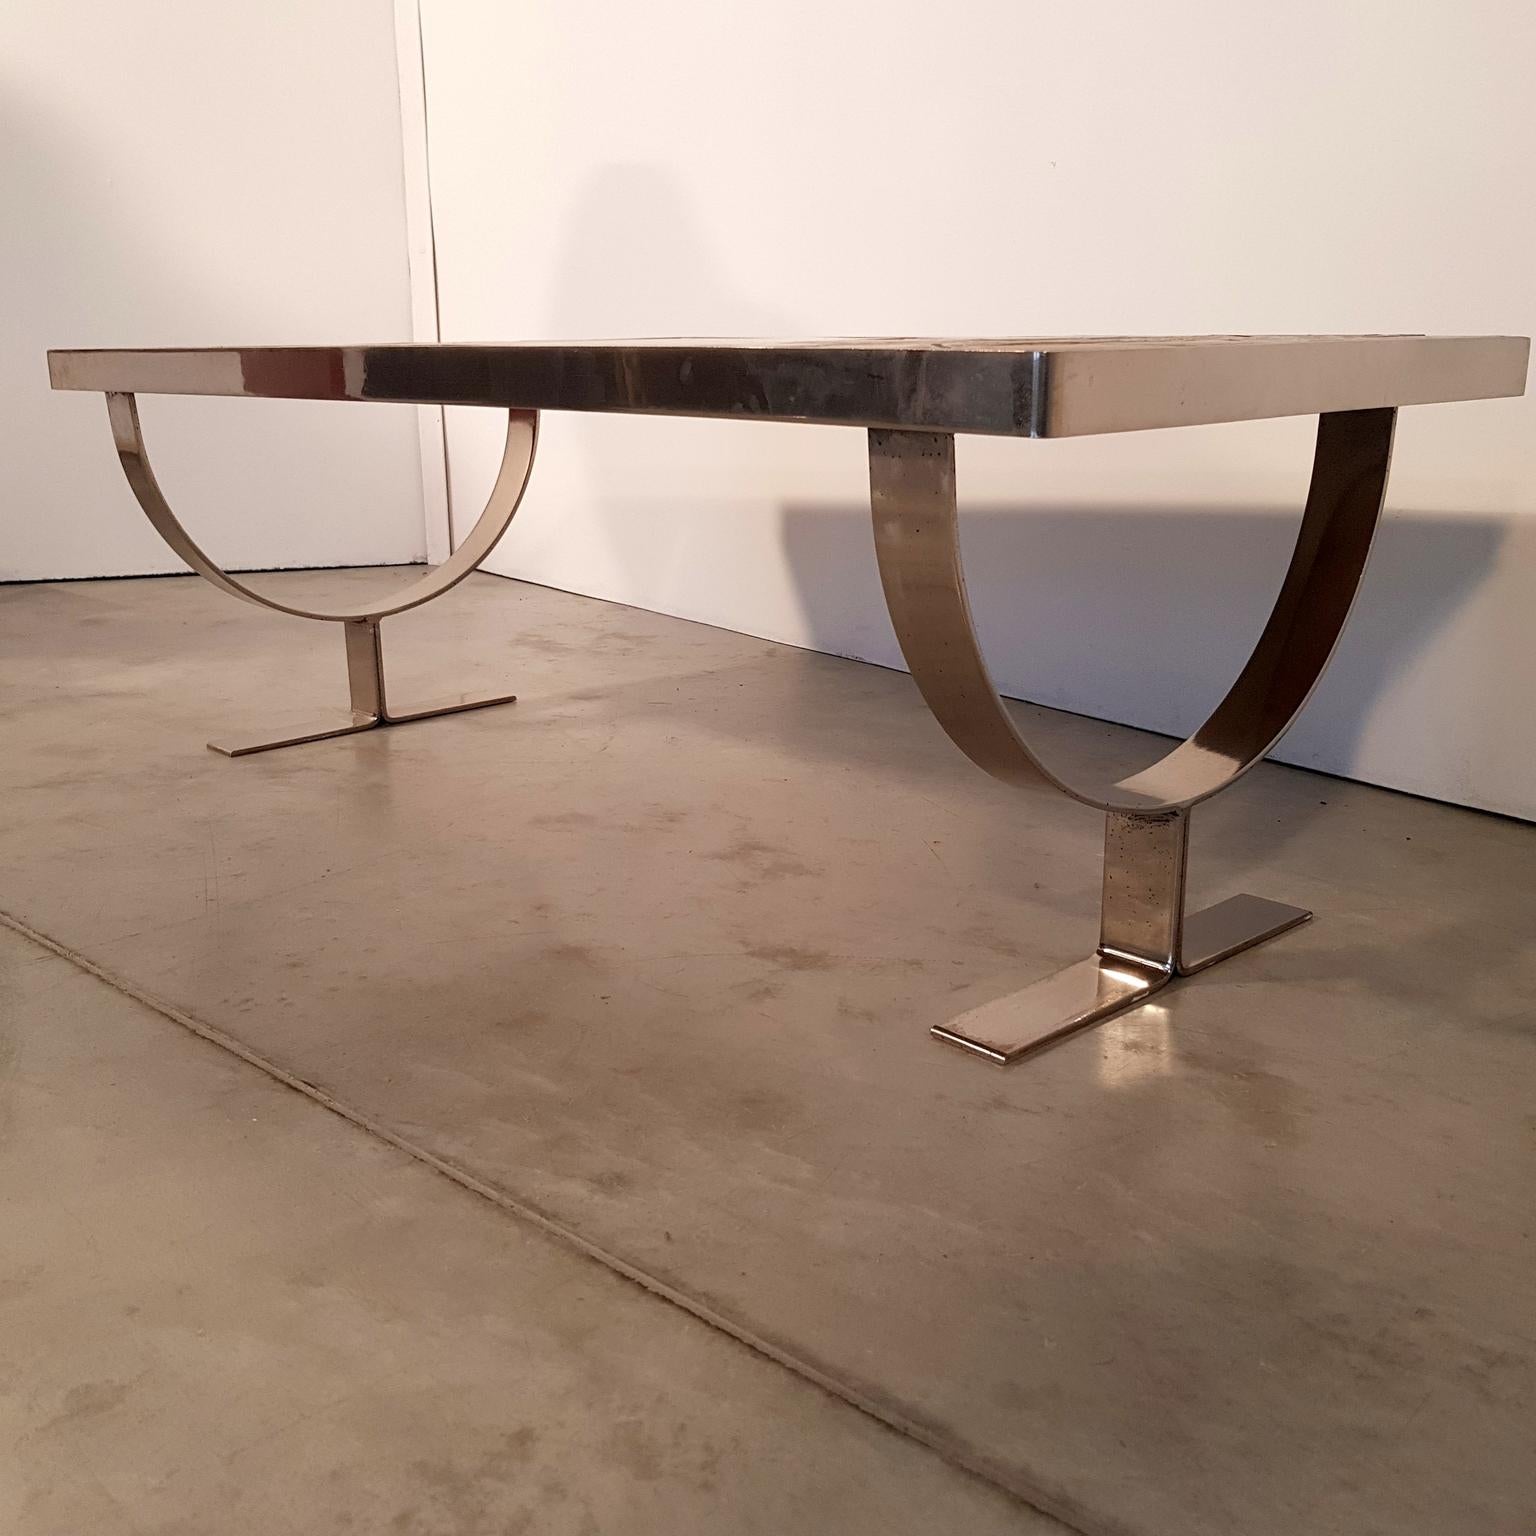 20th Century Ceramic-Top Midcentury Coffee Table with Chrome Legs, France, 1970s For Sale